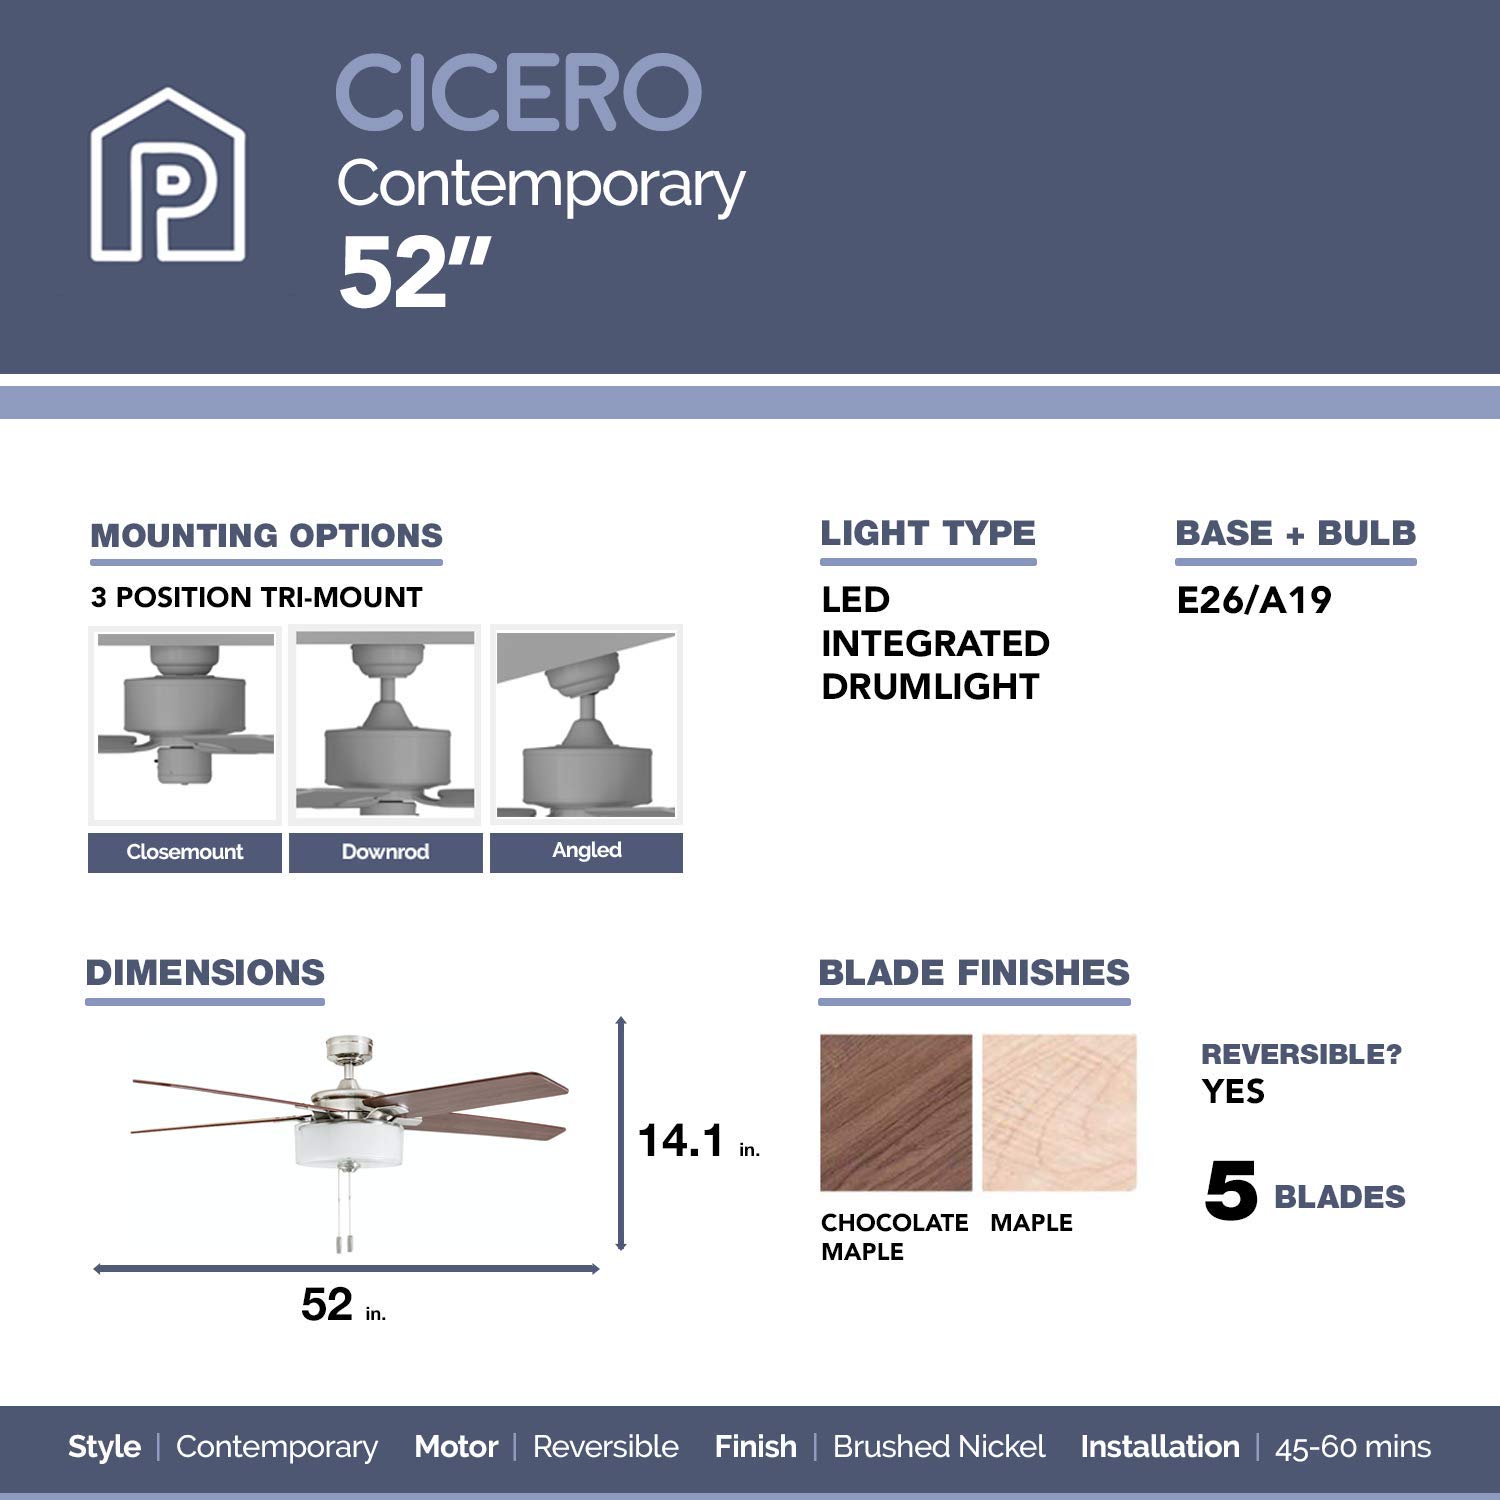 52 Inch Cicero, Brushed Nickel, Pull Chain, Ceiling Fan by Prominence Home